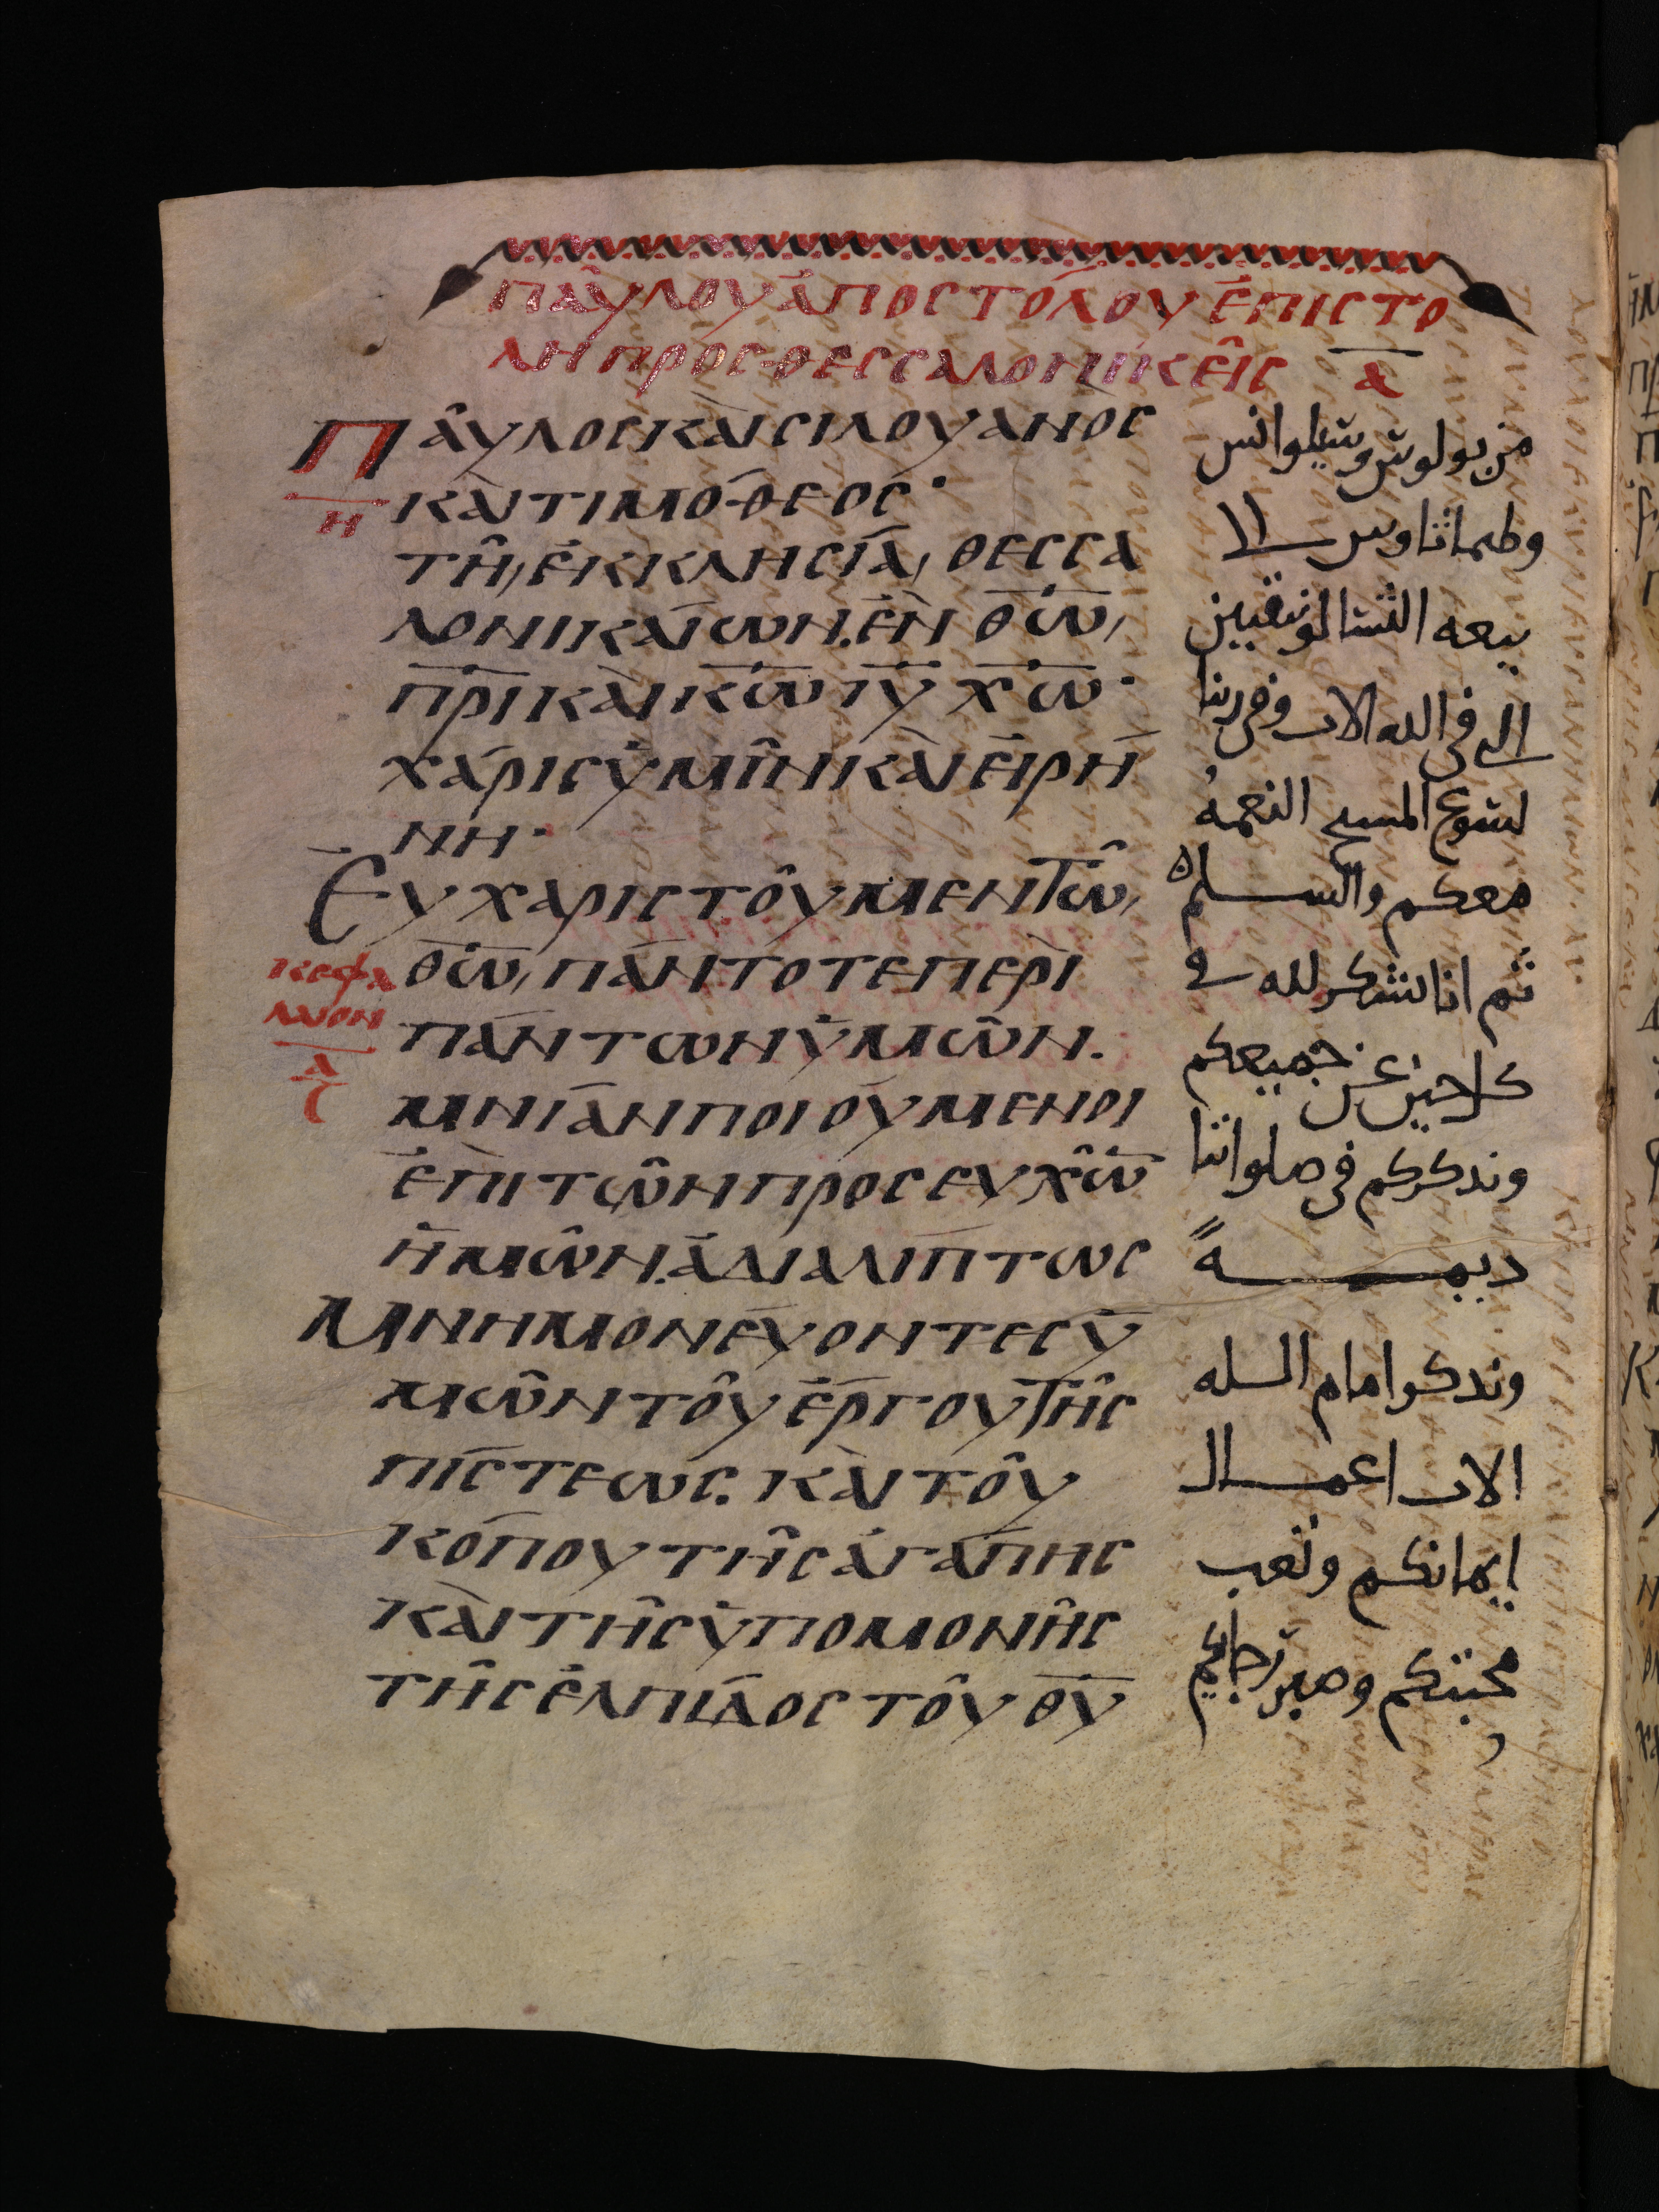 Canceled: Exploring the Significance of a Ninth Century Sinai Palimpsest